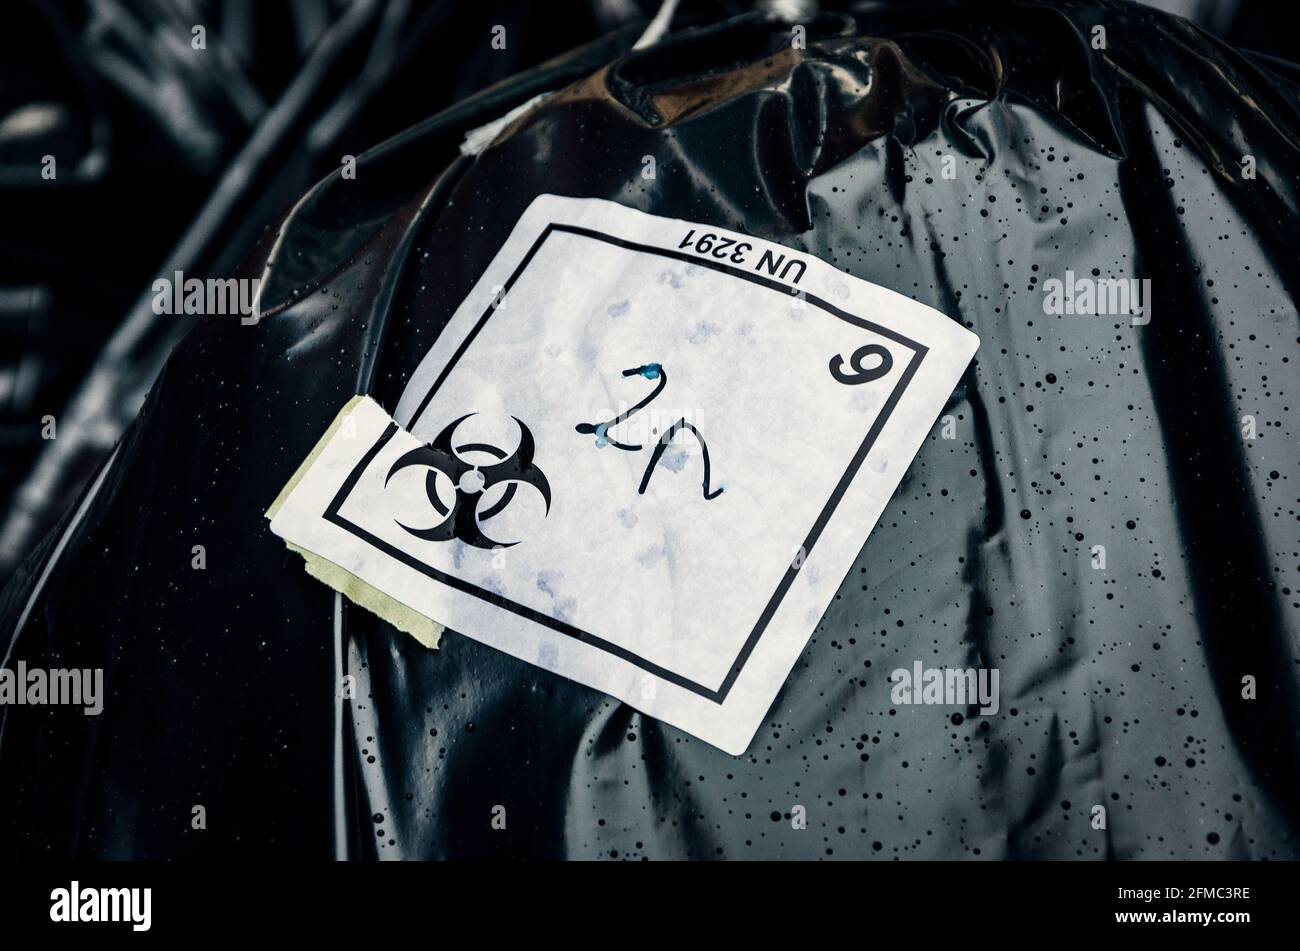 Biohazard waste disposable black bags with logo on sticker, hospital waste on street in a rainy day Stock Photo